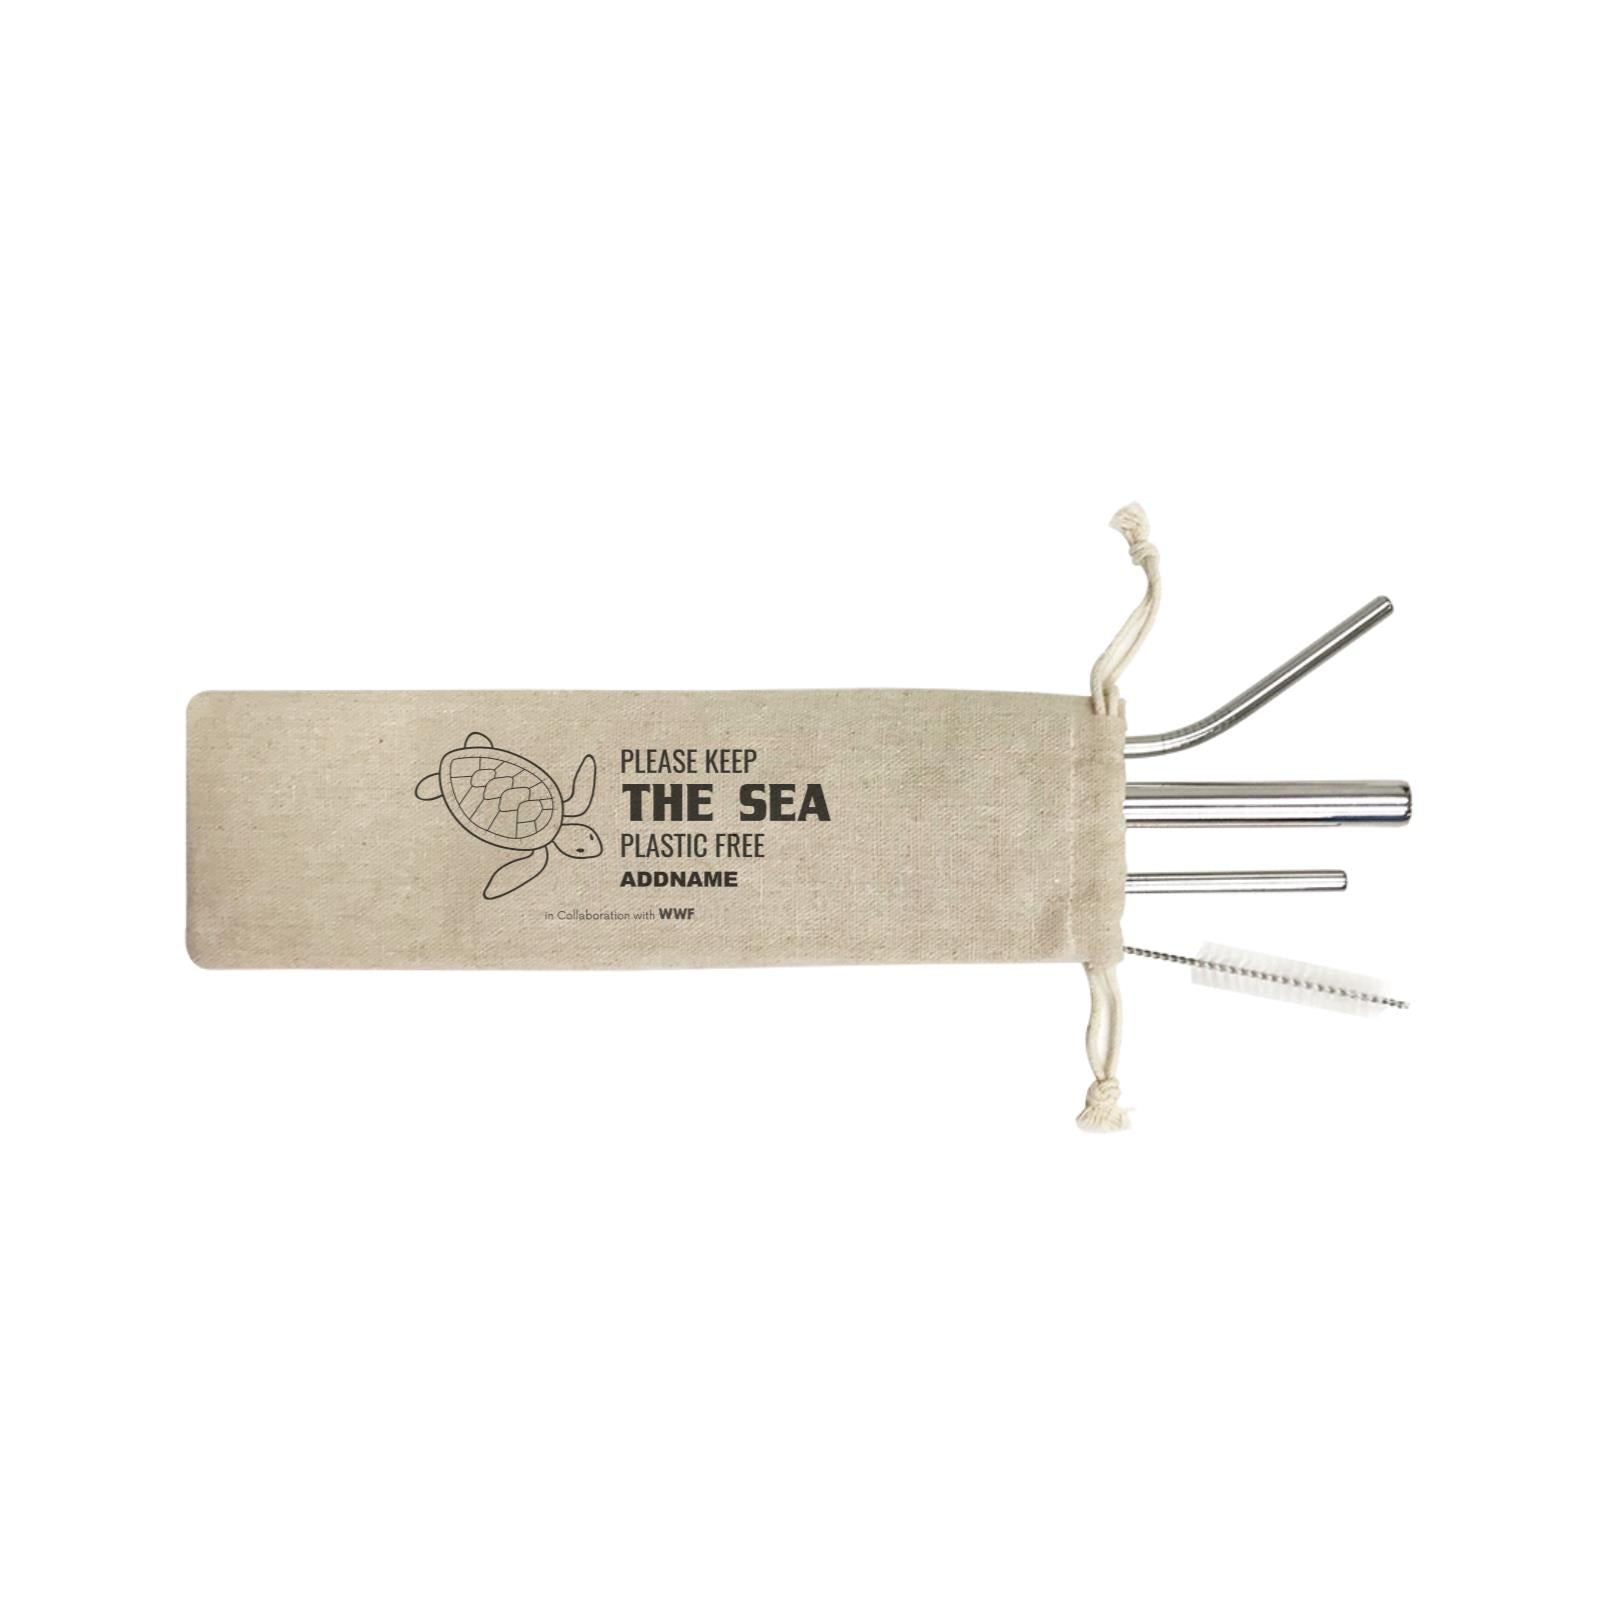 Keep The Sea Plastic Free Turtle Stamp Addname SB 4-In-1 Stainless Steel Straw Set in Satchel